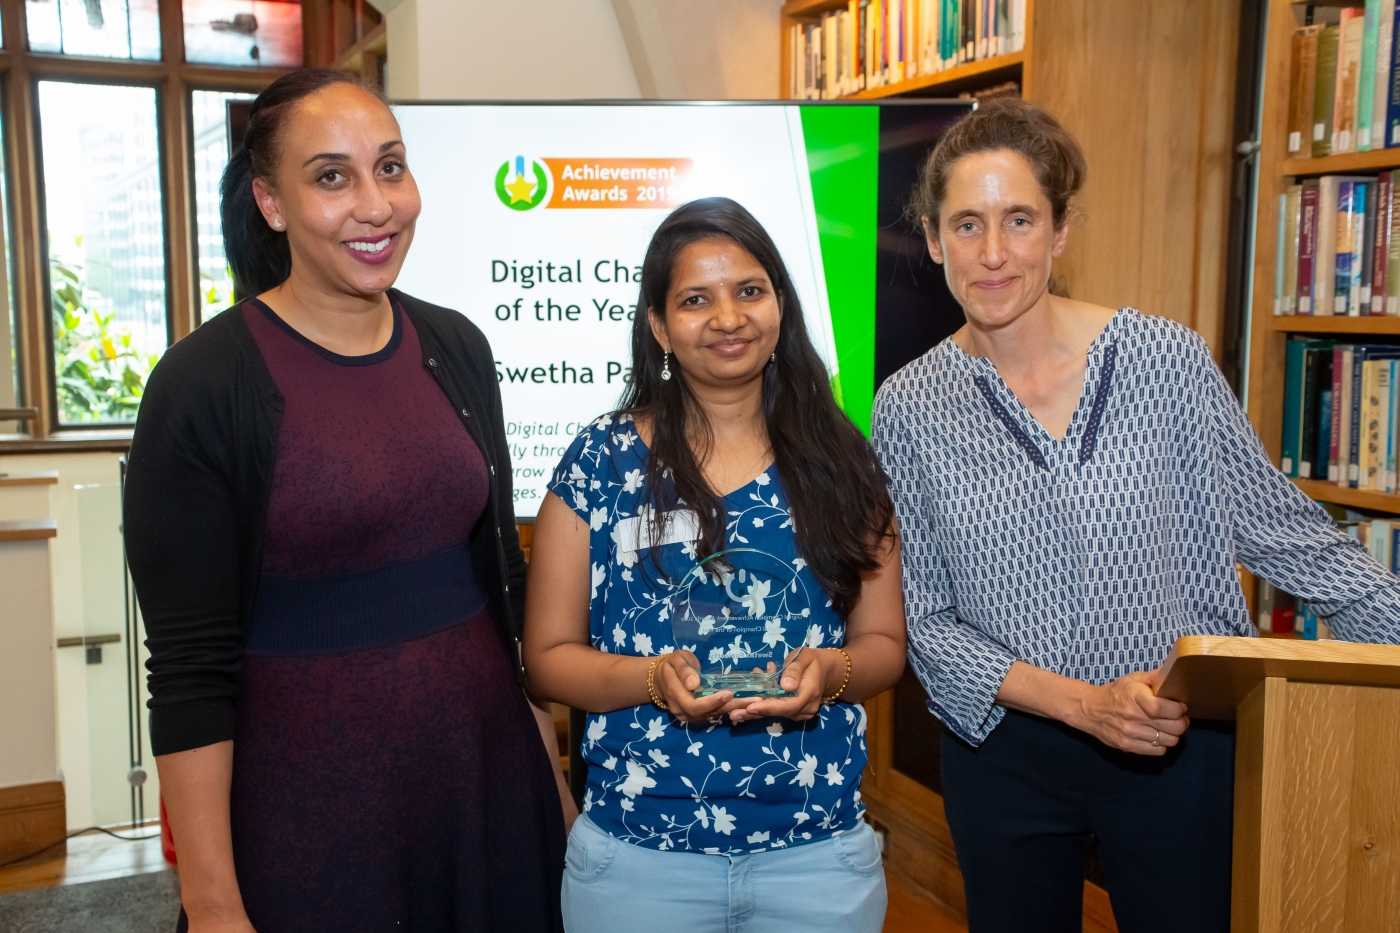 DC of the Year goes to Swetha Papisetty